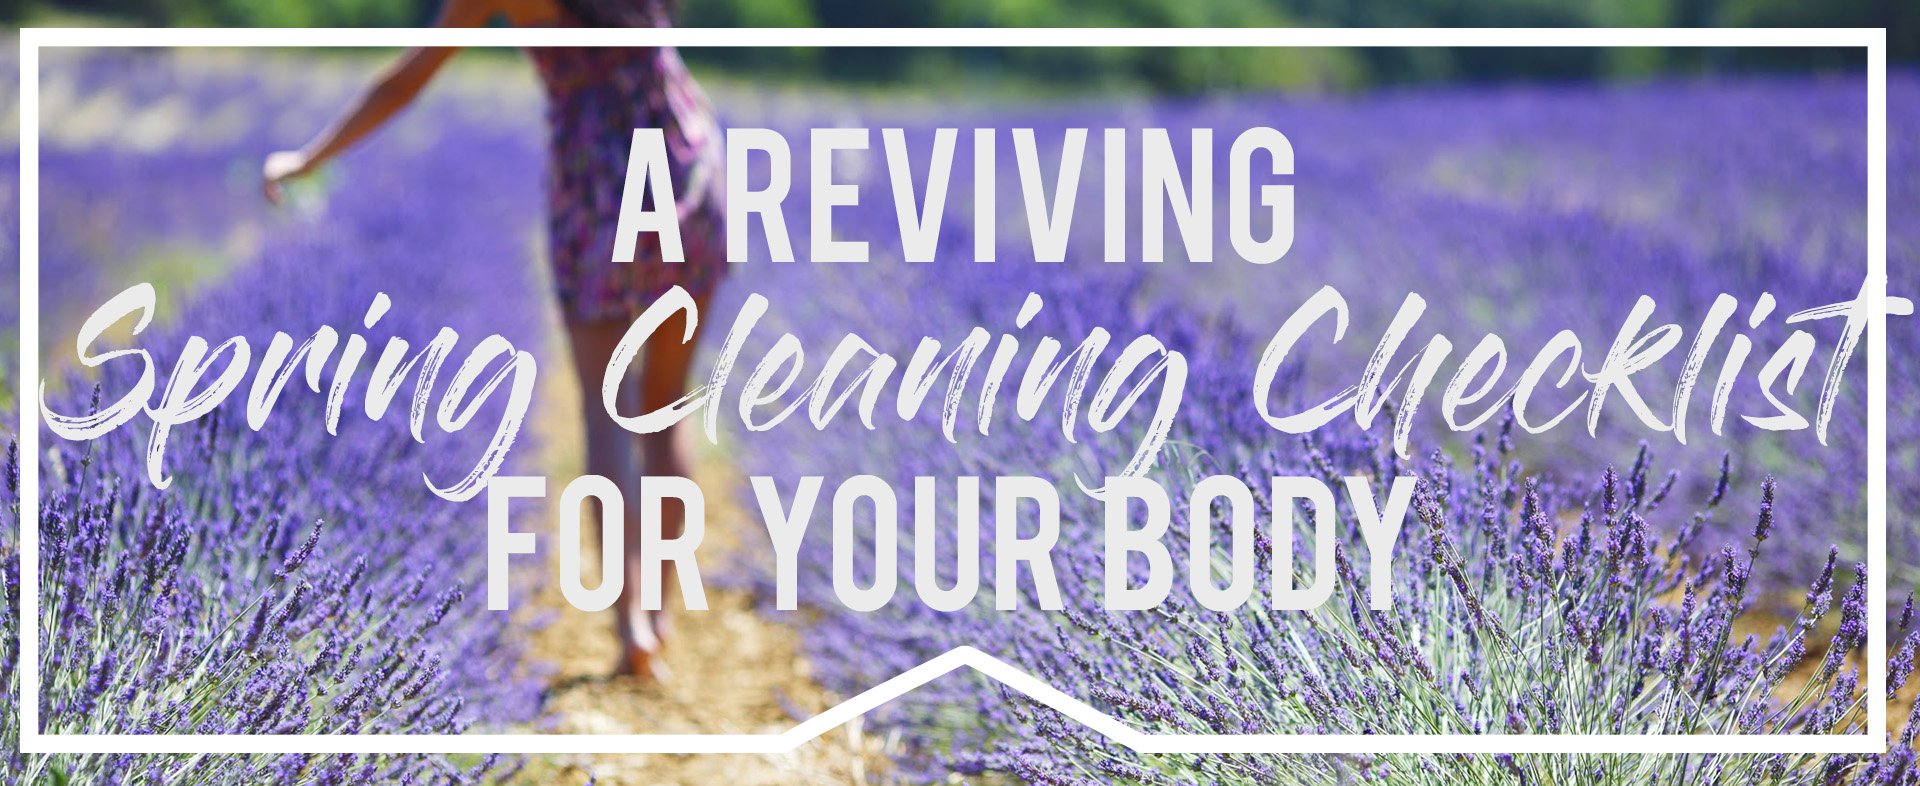 A Reviving Spring Cleaning Checklist For Your Body